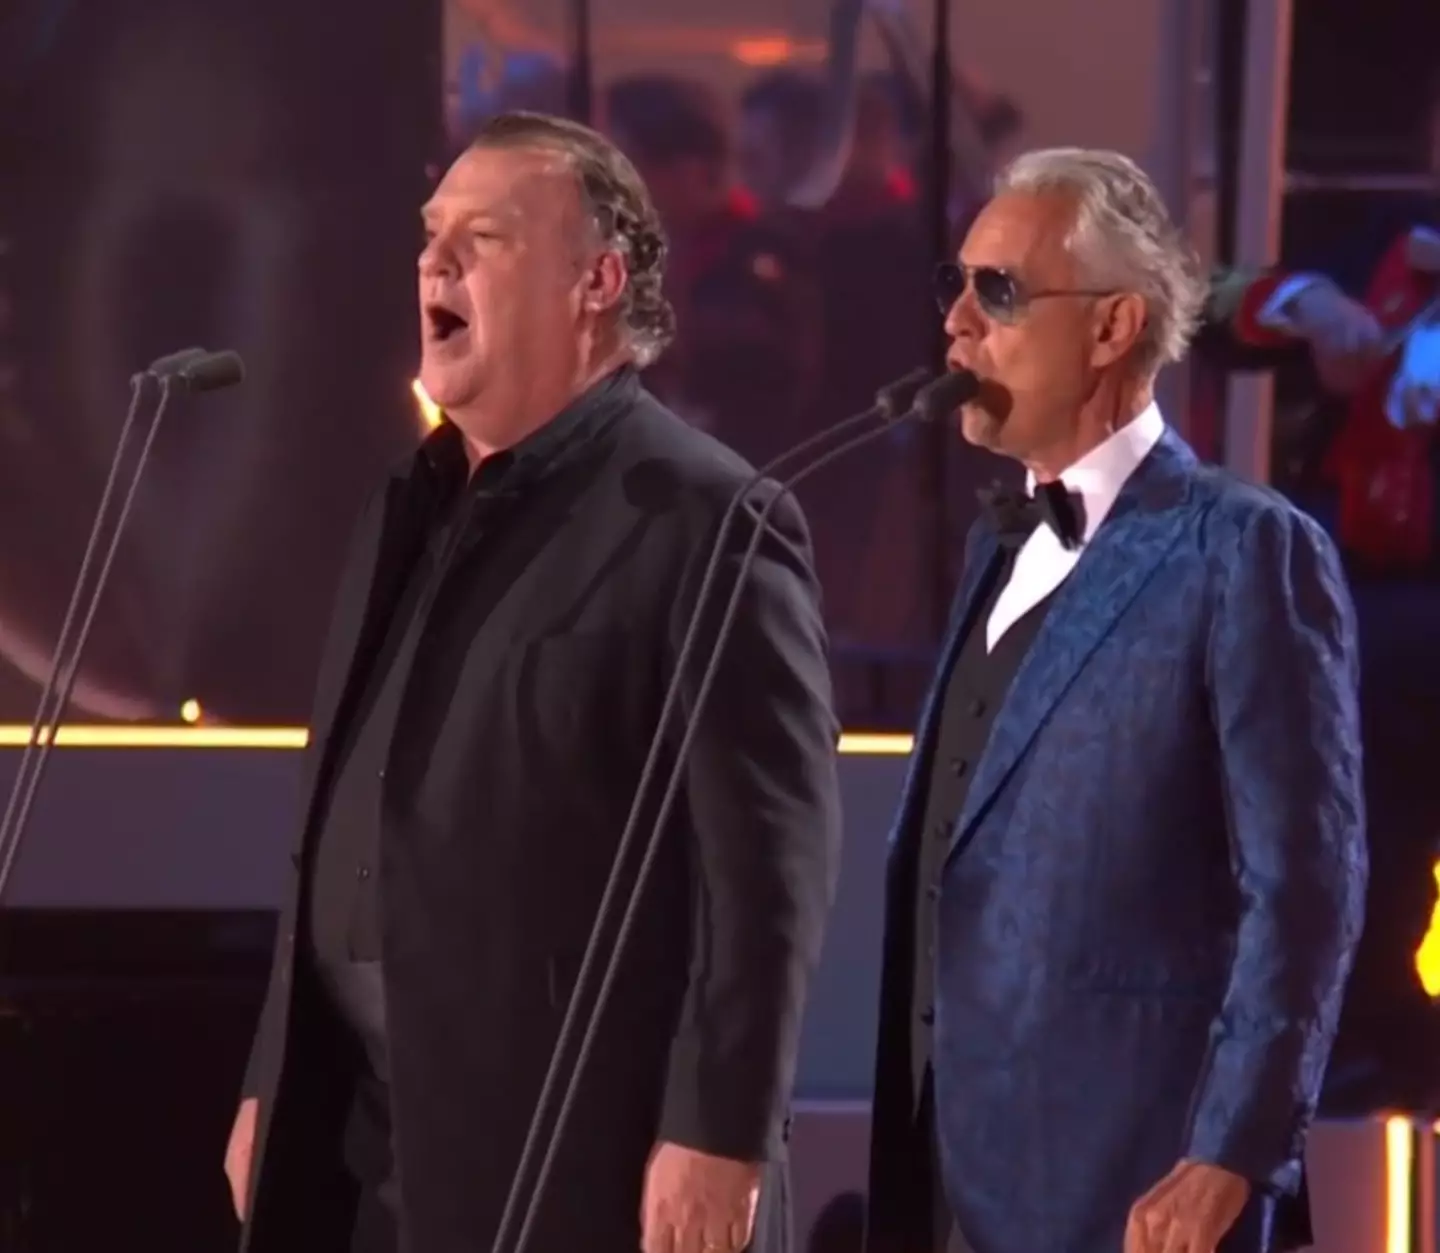 The opera legends gave an incredible rendition of You'll Never Walk Alone.